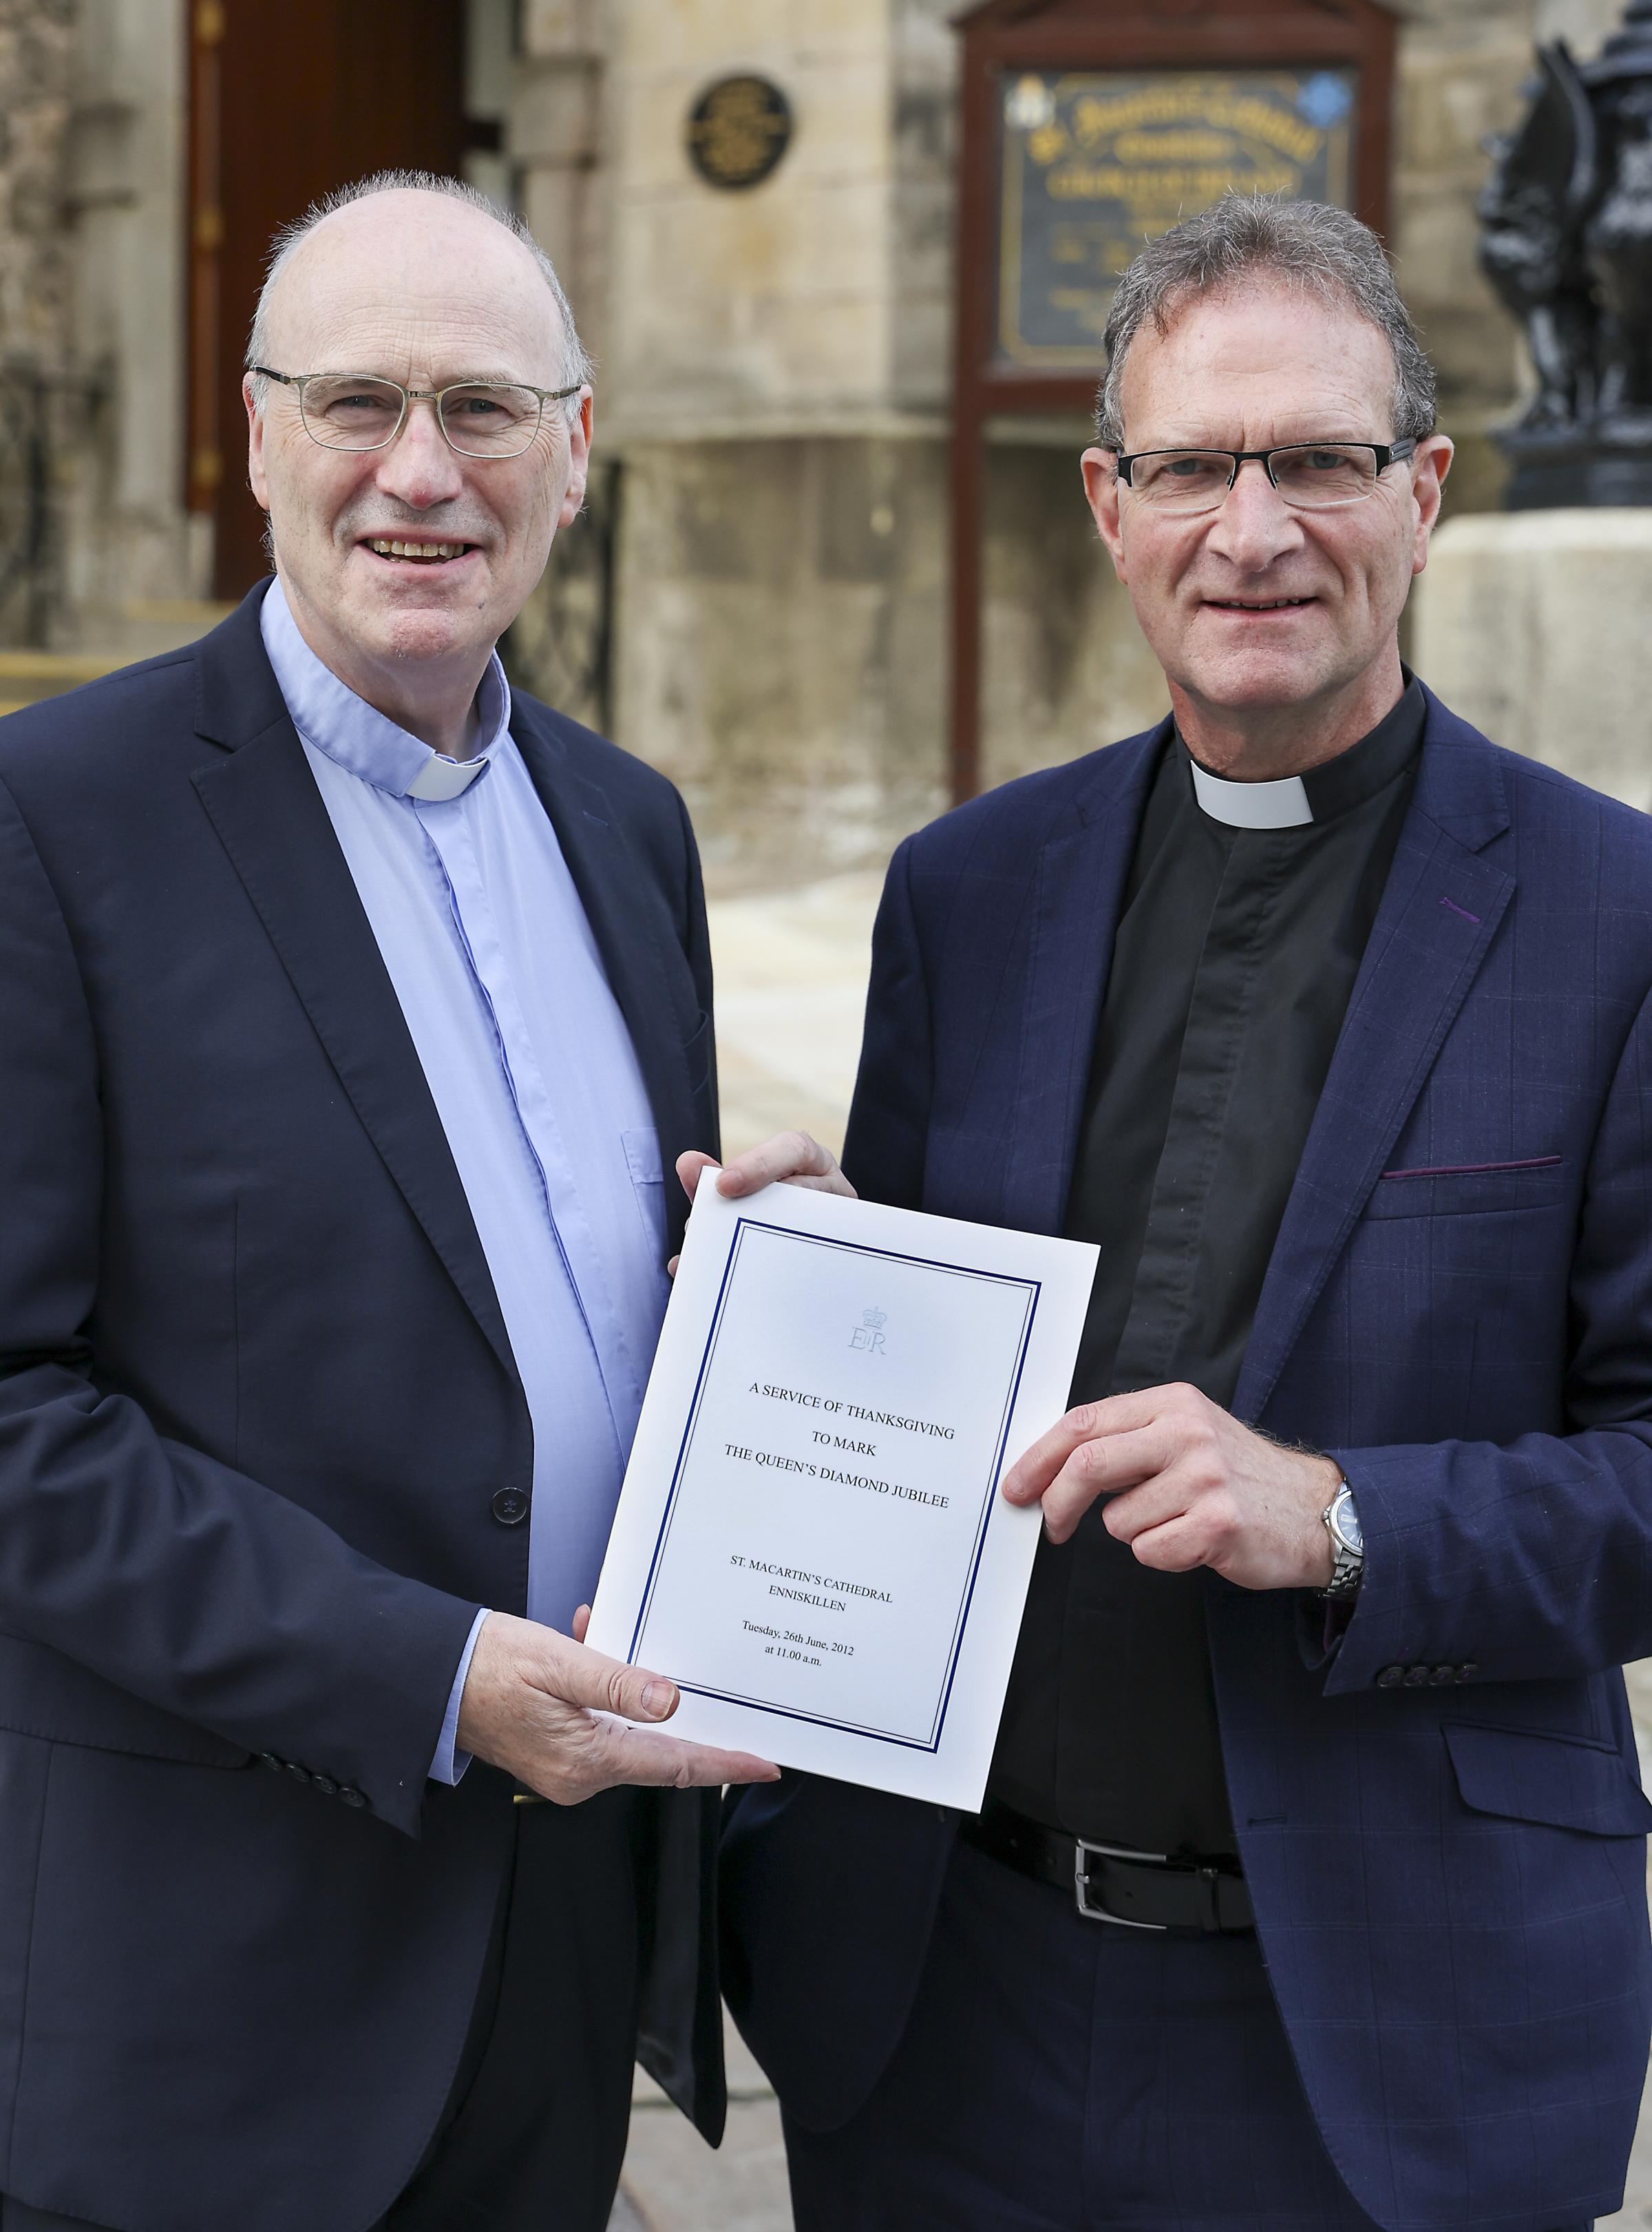 The Very Rev. Dean Kenneth Hall with Monsignor, Peter OReilly.